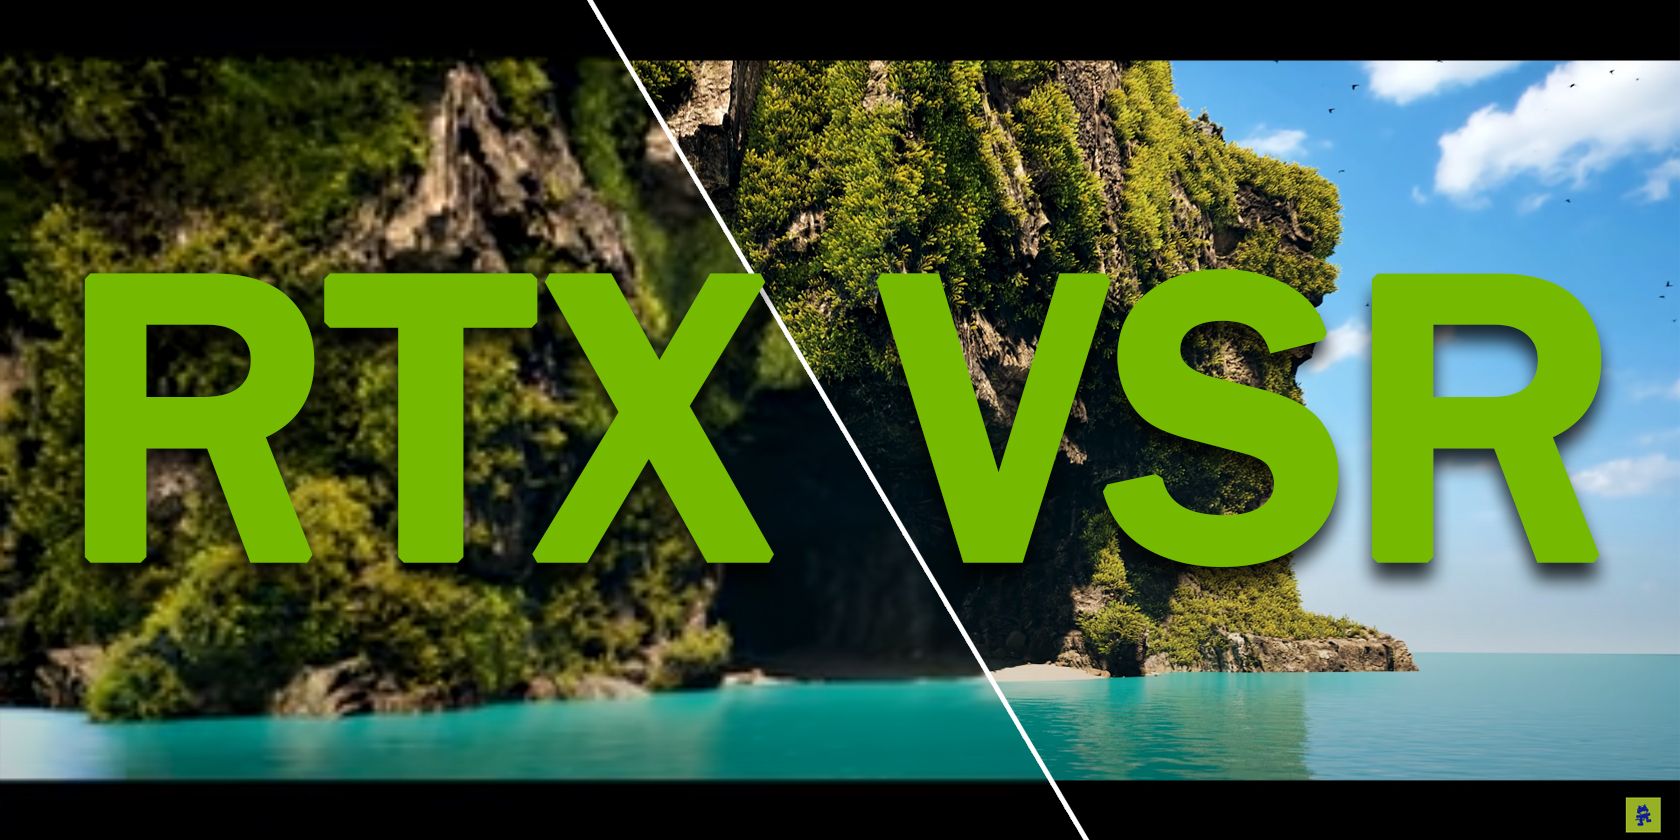 RTX VSR comparison on the Crab Rave YouTube video